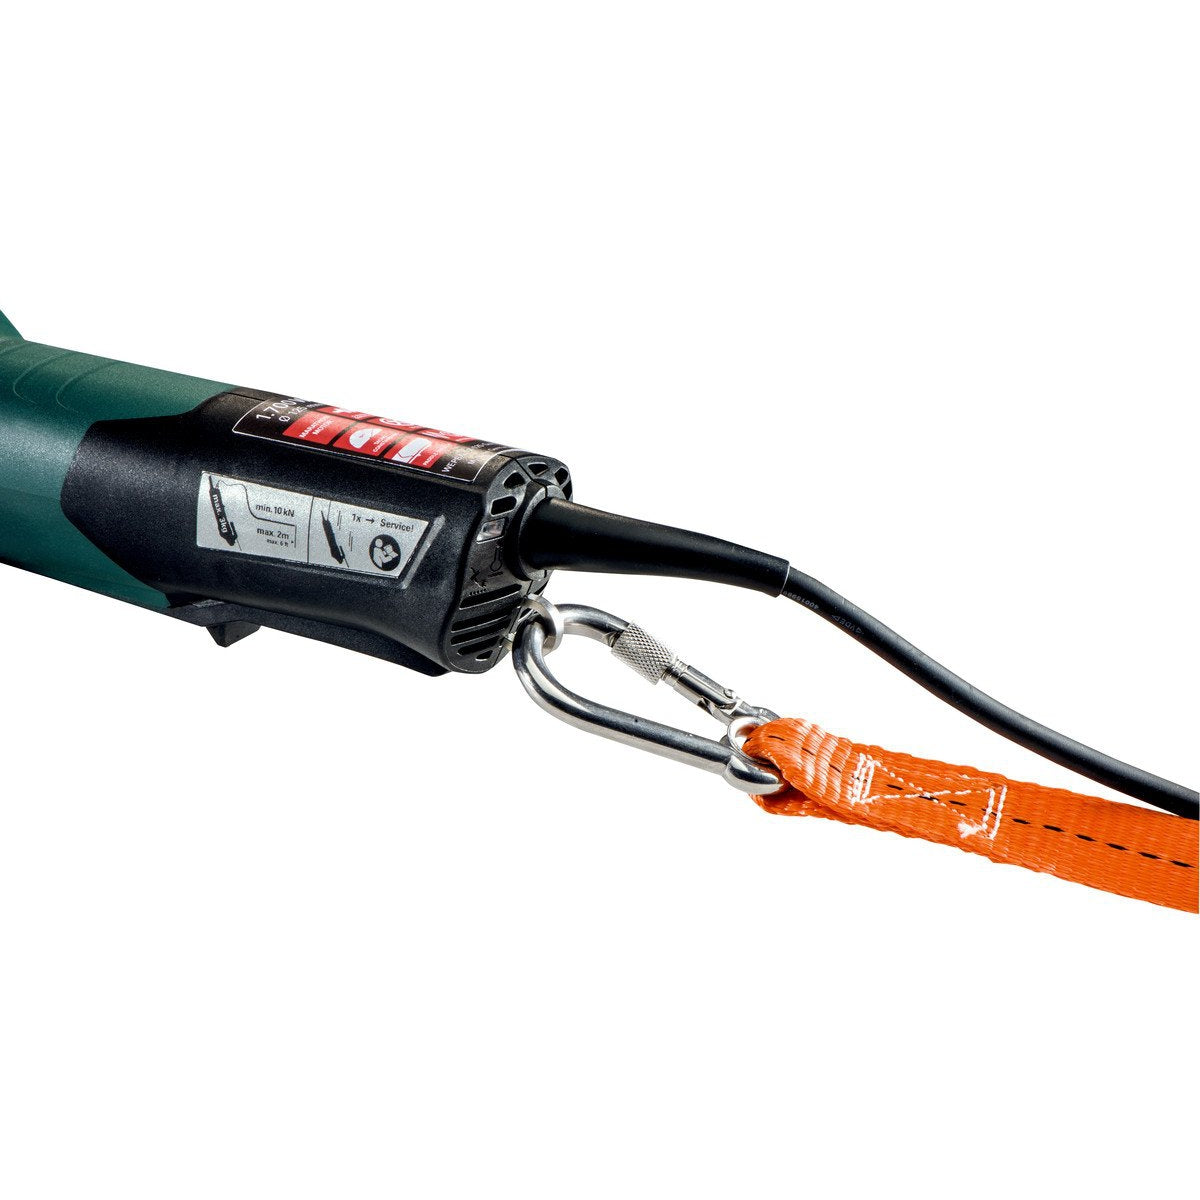 Metabo WPB 13-125 Quick DS 5" Angle Grinder - 600437420